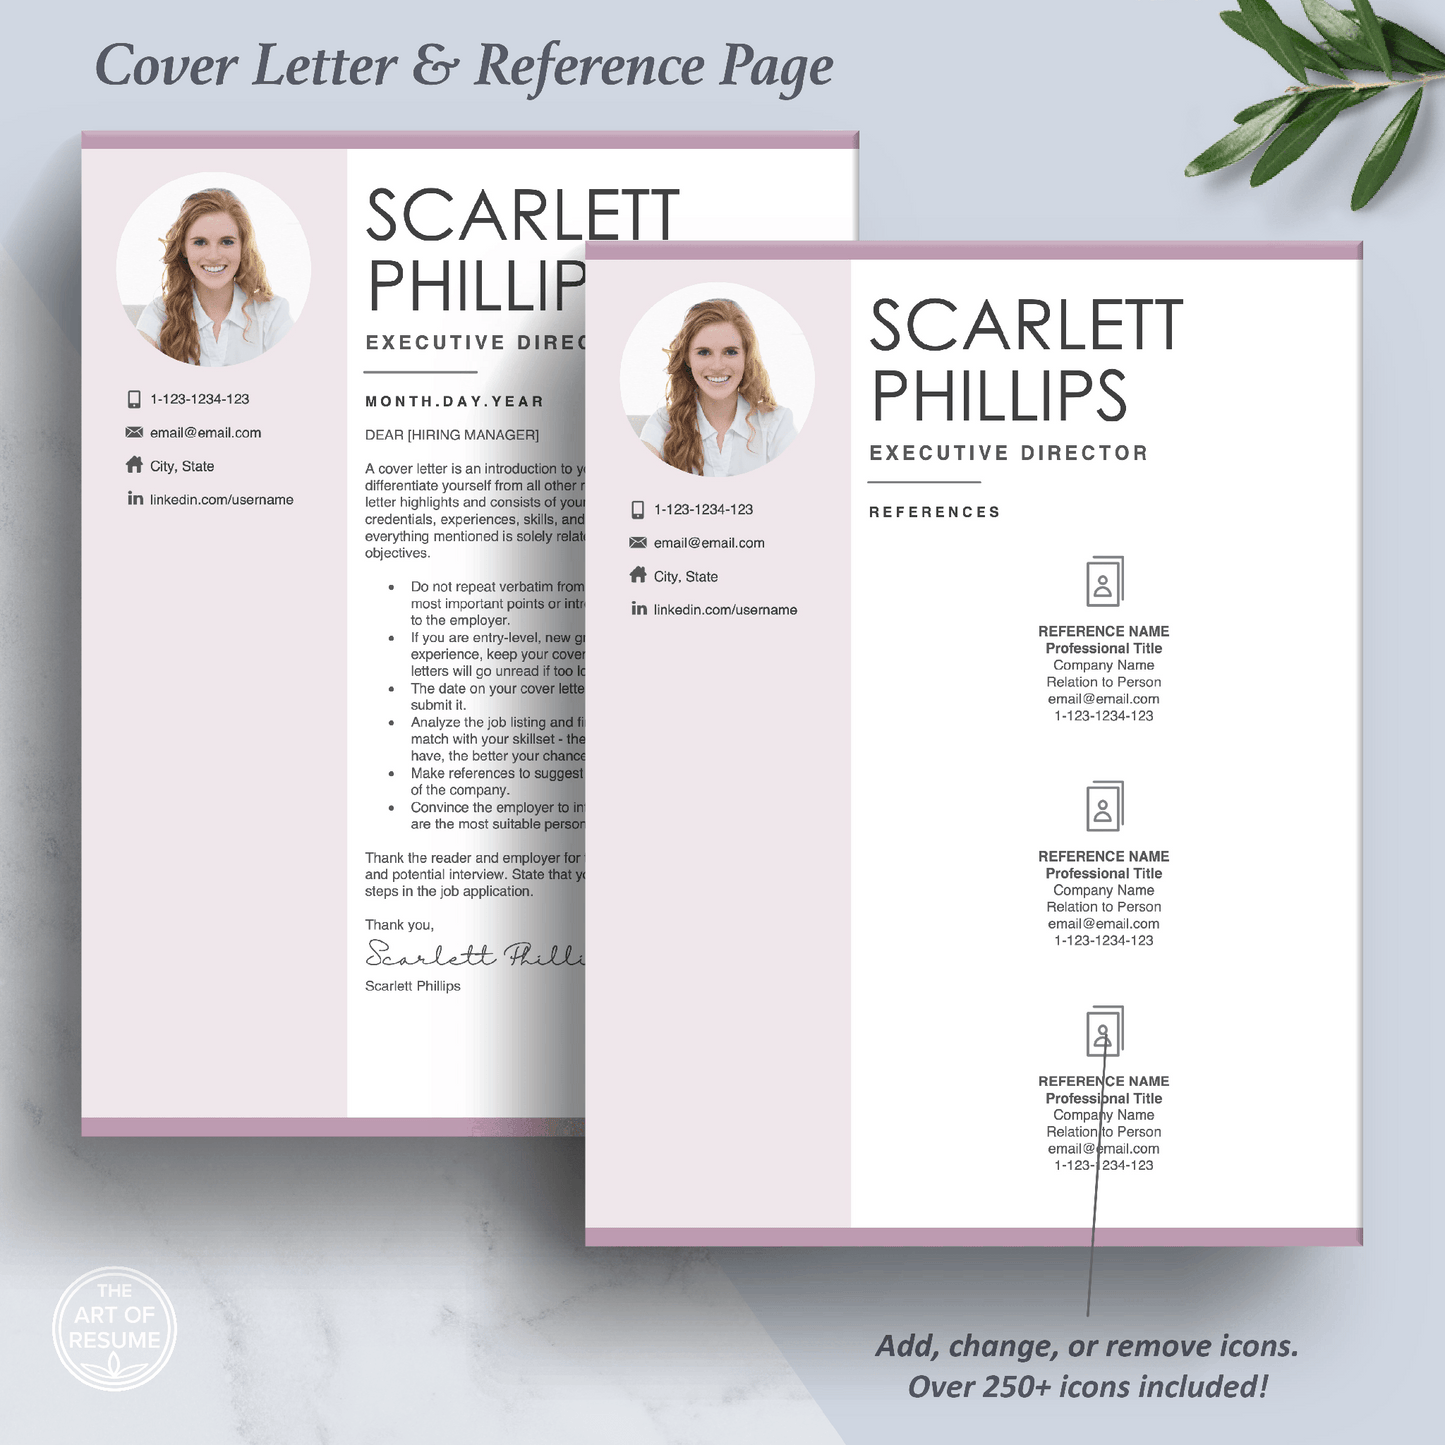 The Art of Resume Templates | Executive C Suite Level Cover Letter and Reference Page Templates Download